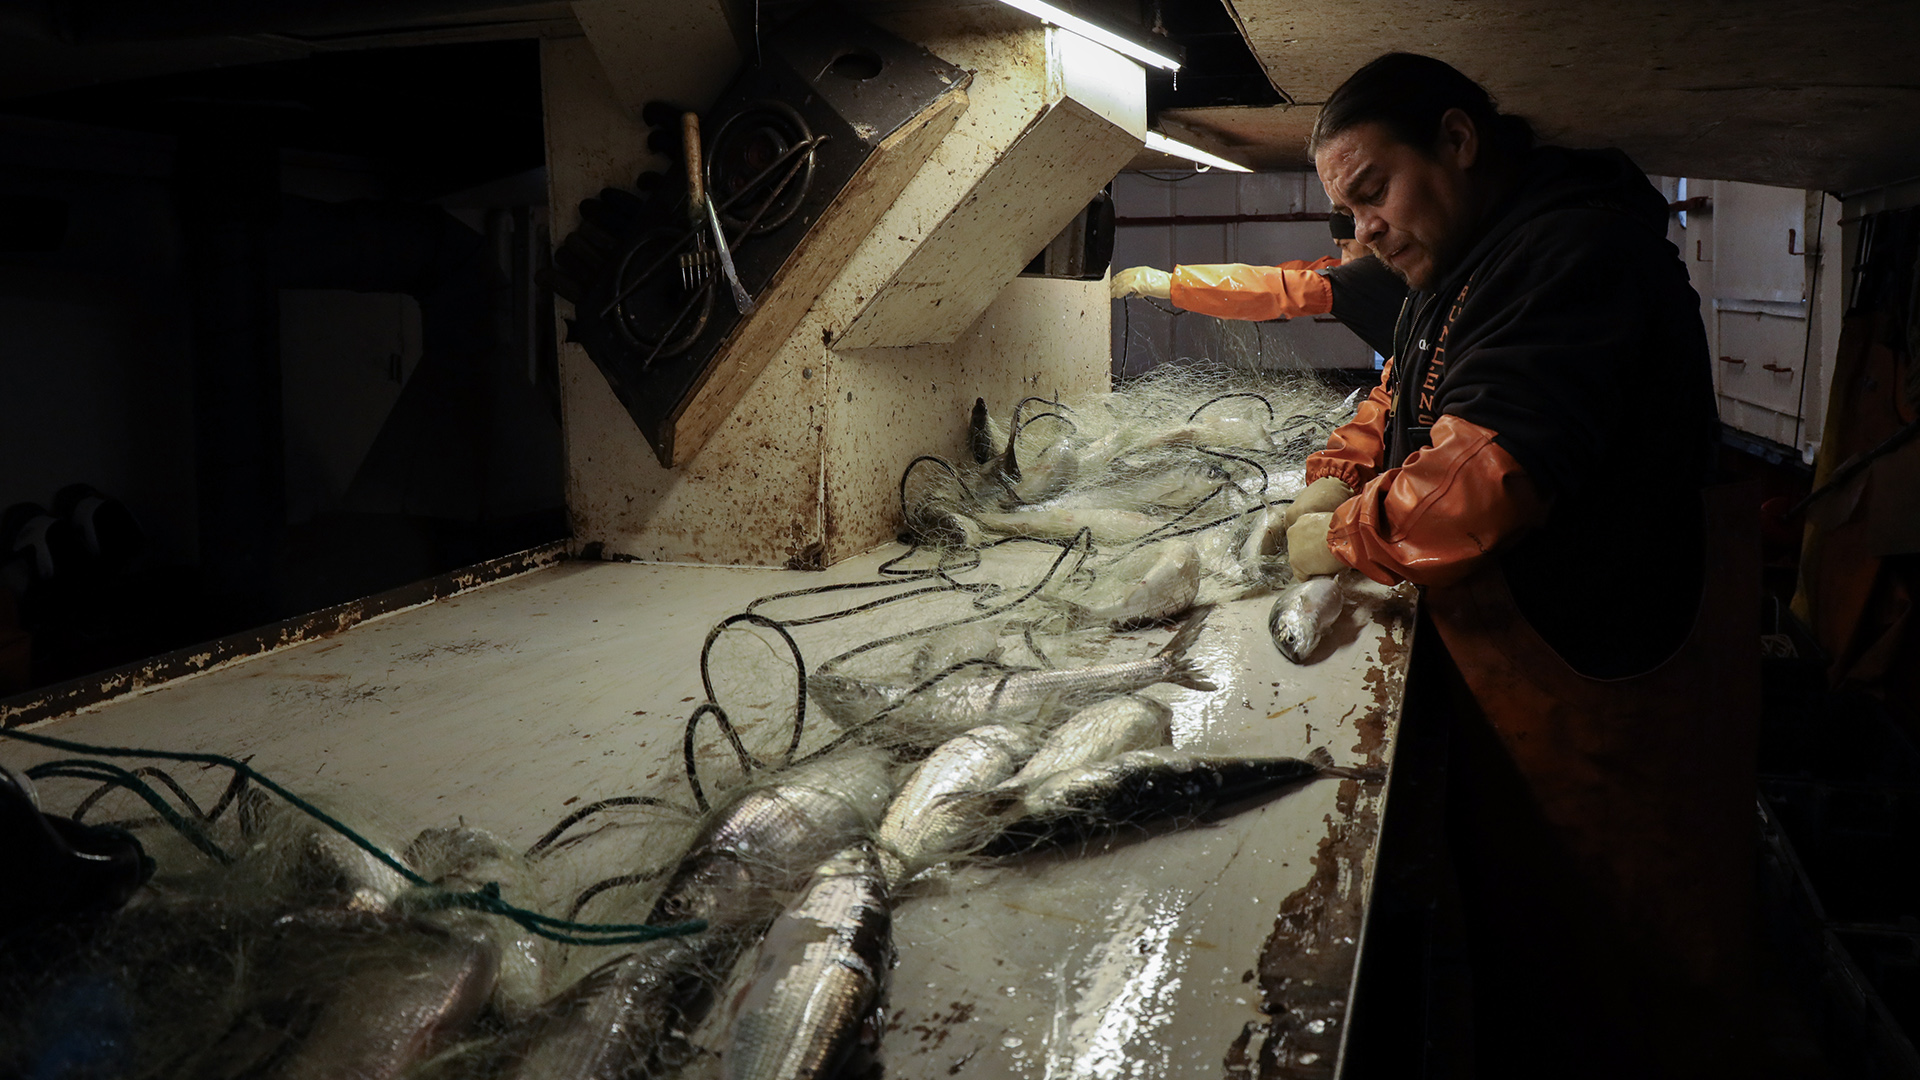 Leland LaPointe stands at the side of a long table inside a fishing boat and pulls fish from nets.